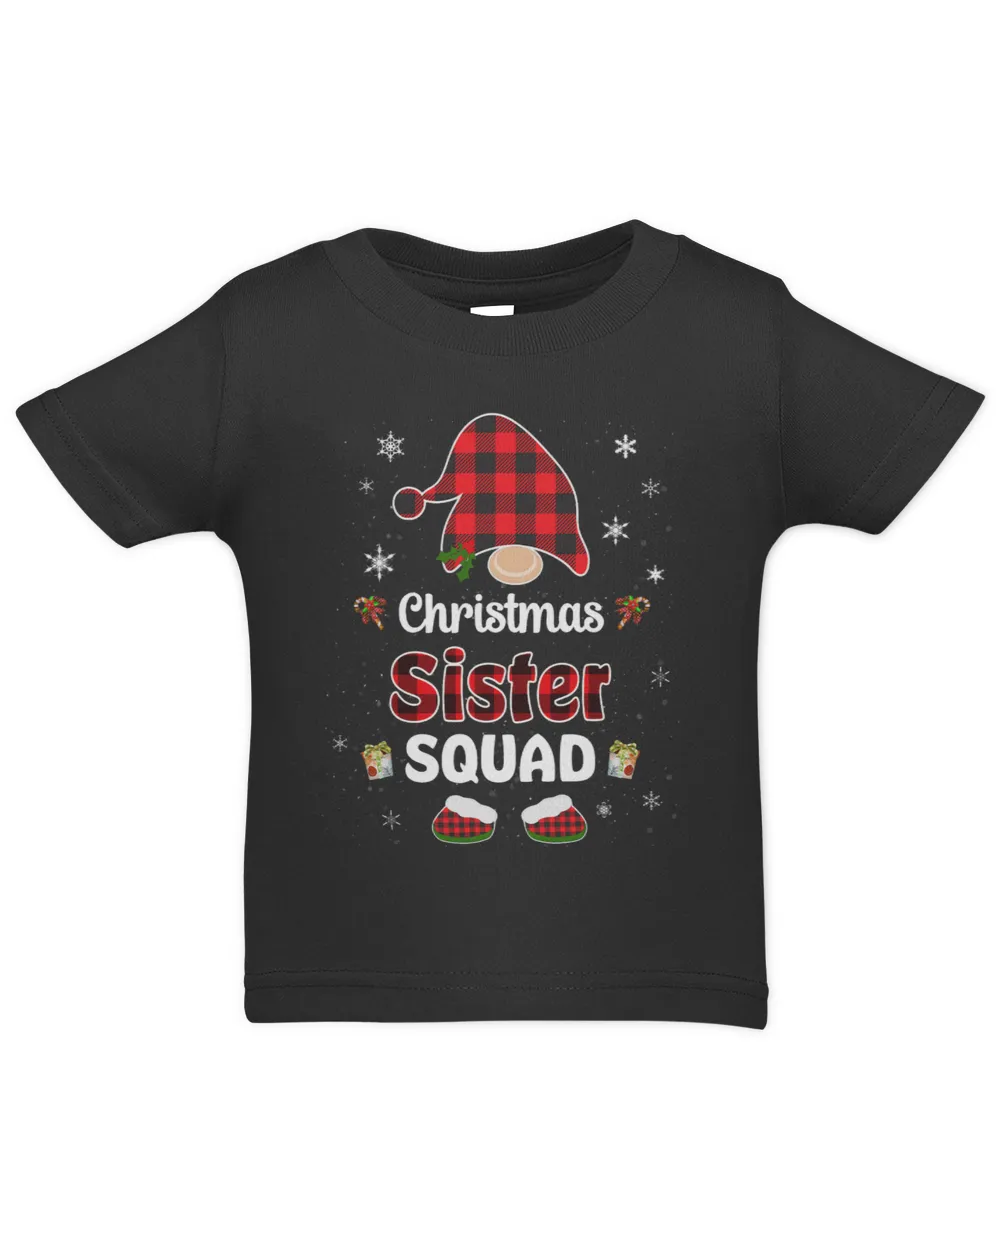 Christmas Sister squad family group matching red plaid